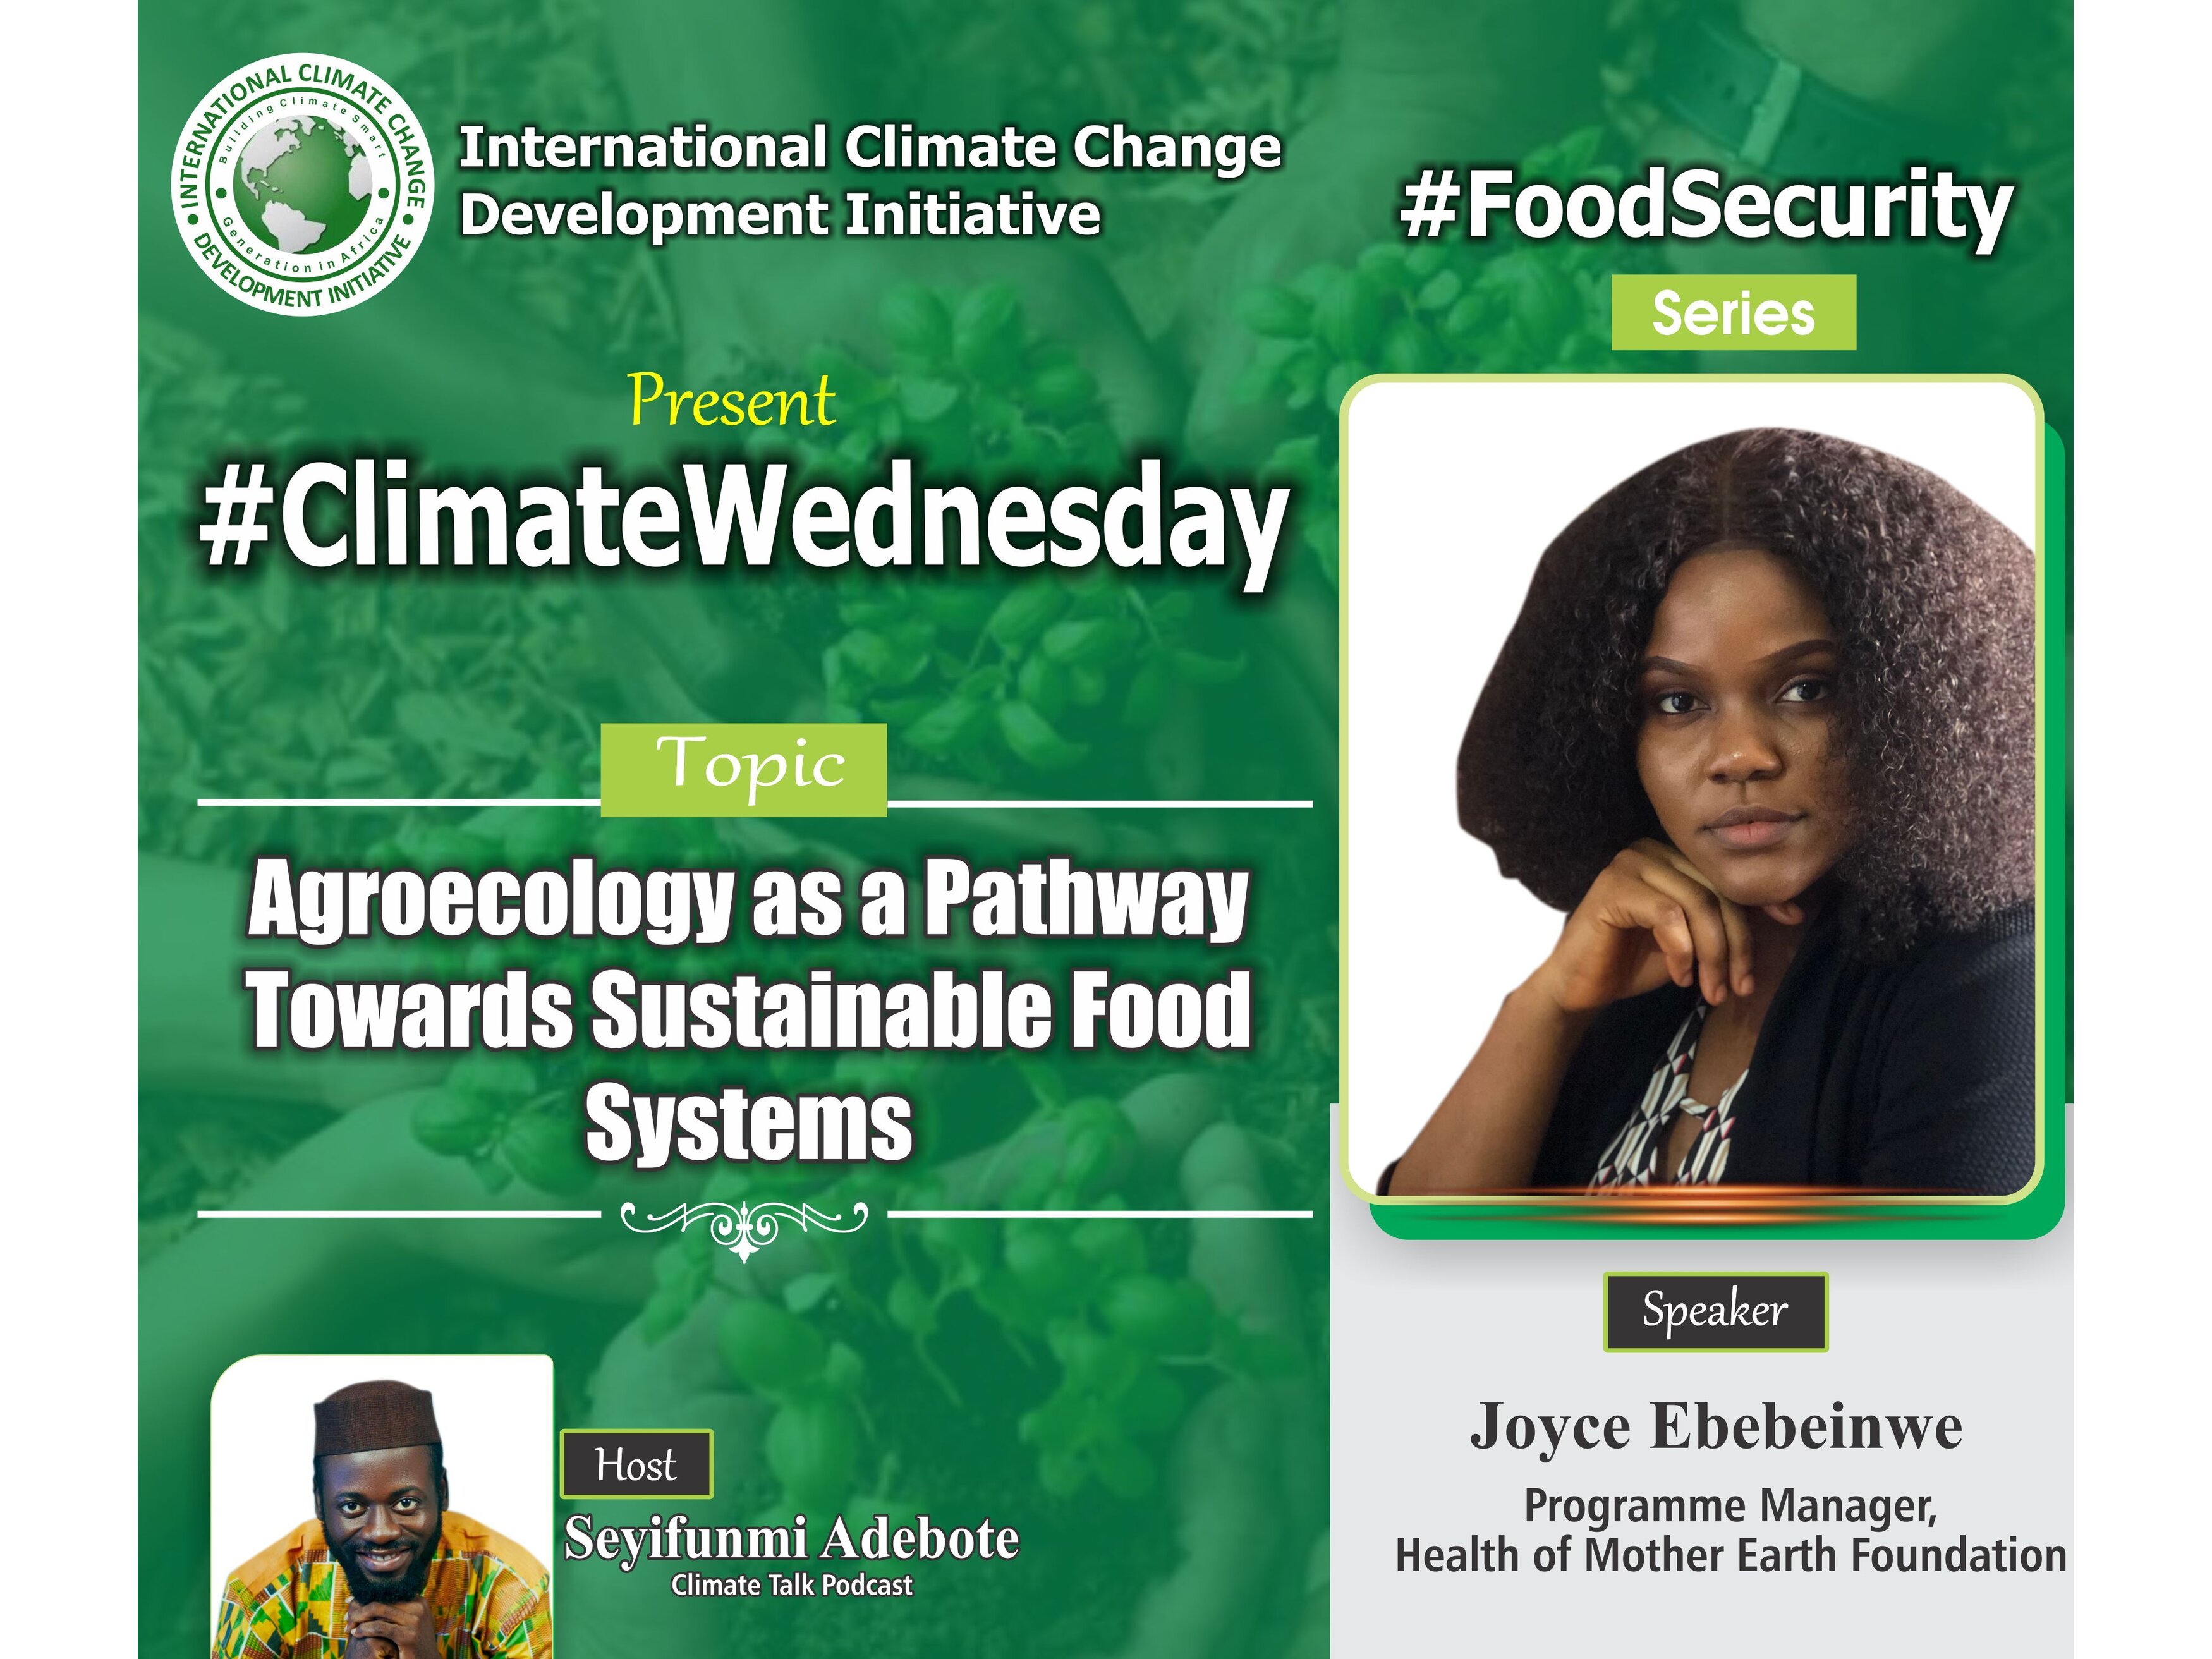 Agroecology as a Pathway Towards Sustainable Food Systems